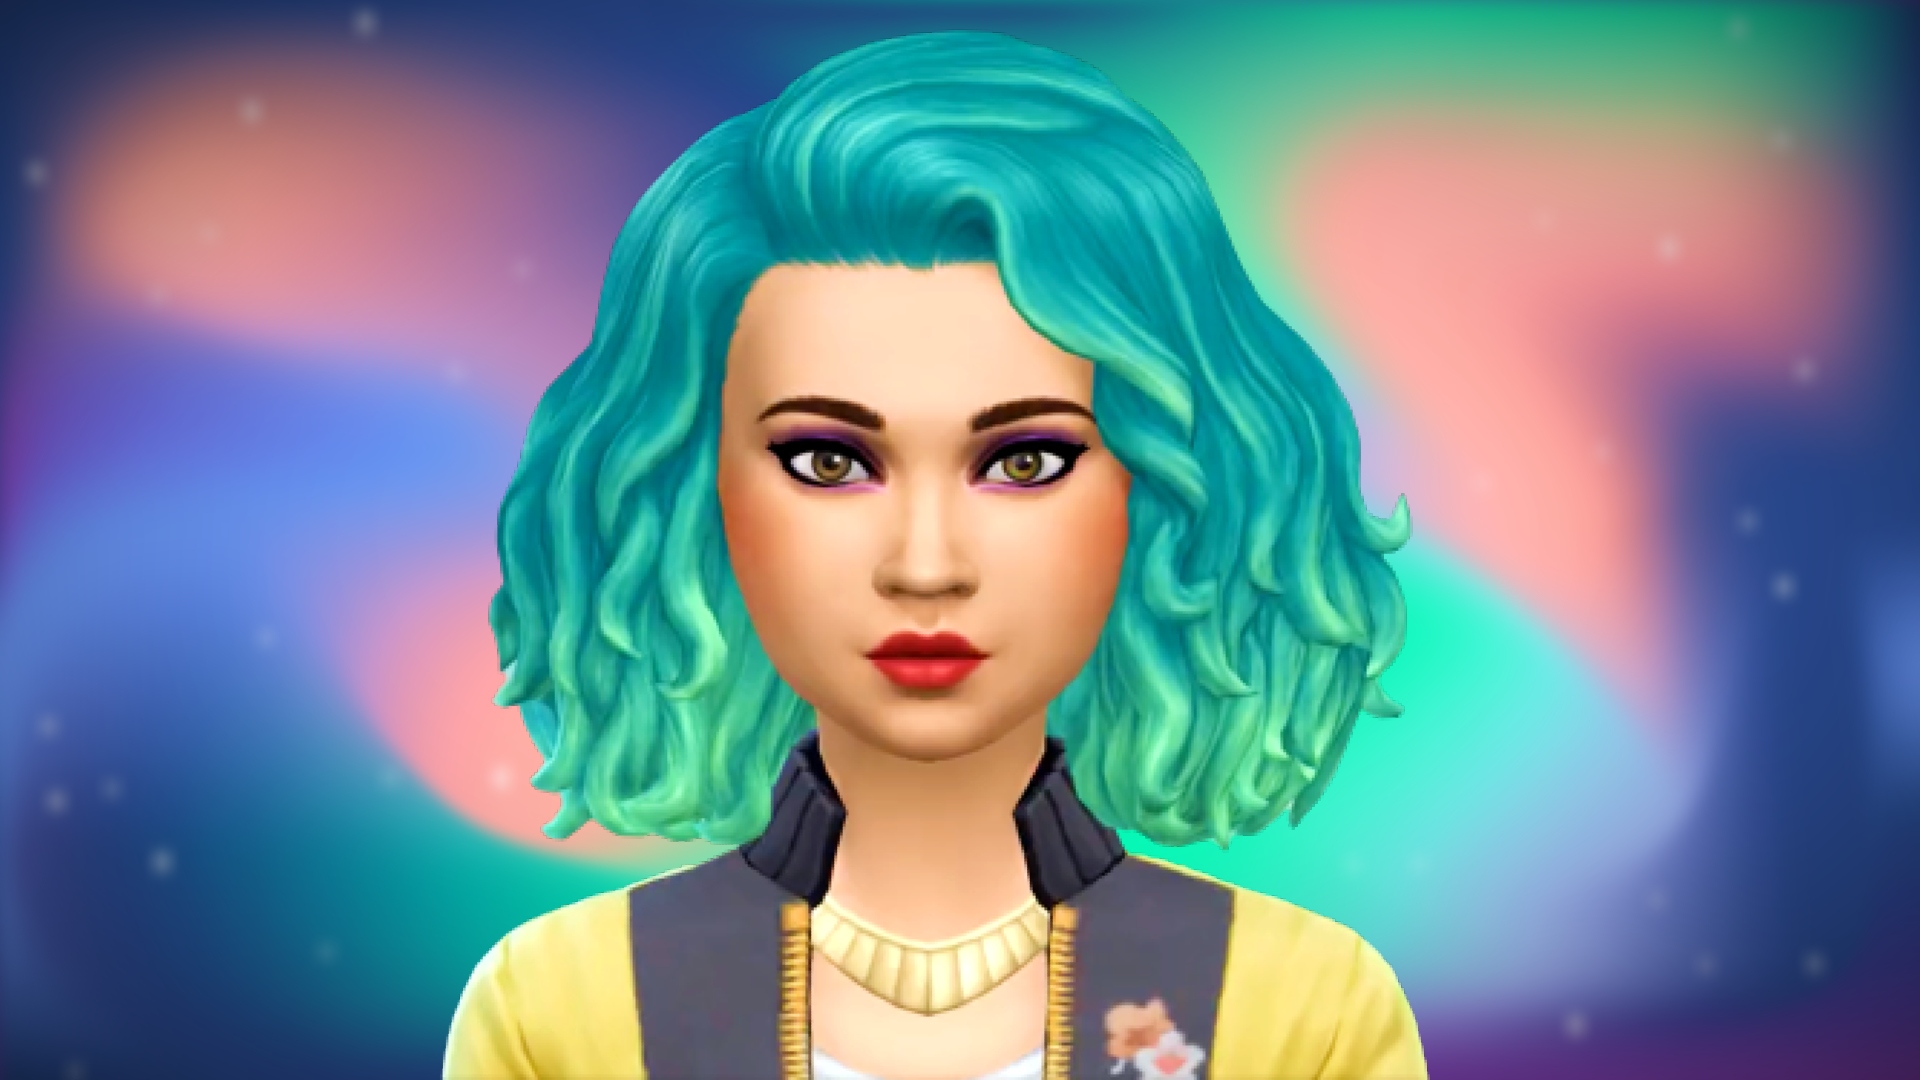 The Sims 4 Drops New Curly Hairstyle Free To Download Now Boson News